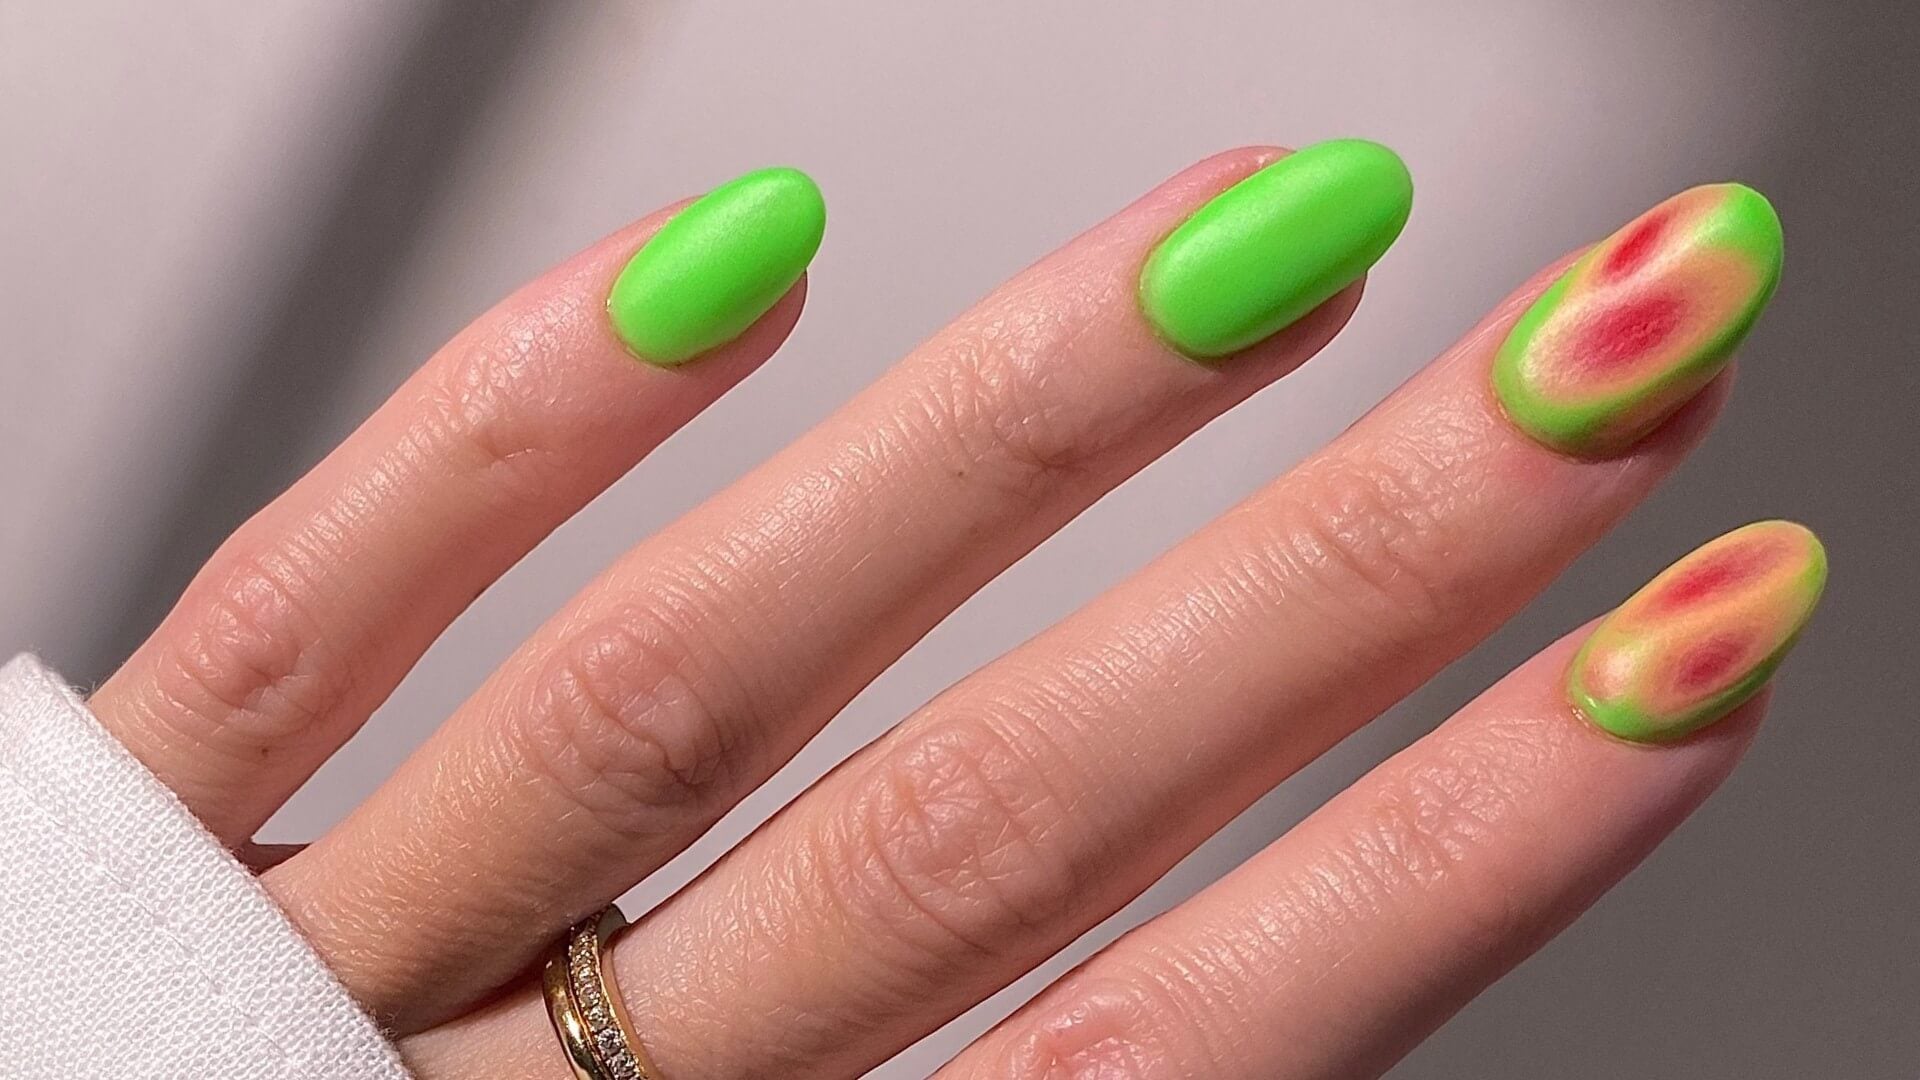 30 Light up Your Nails with Electric Energy for Summer : Neon Green & Lilac